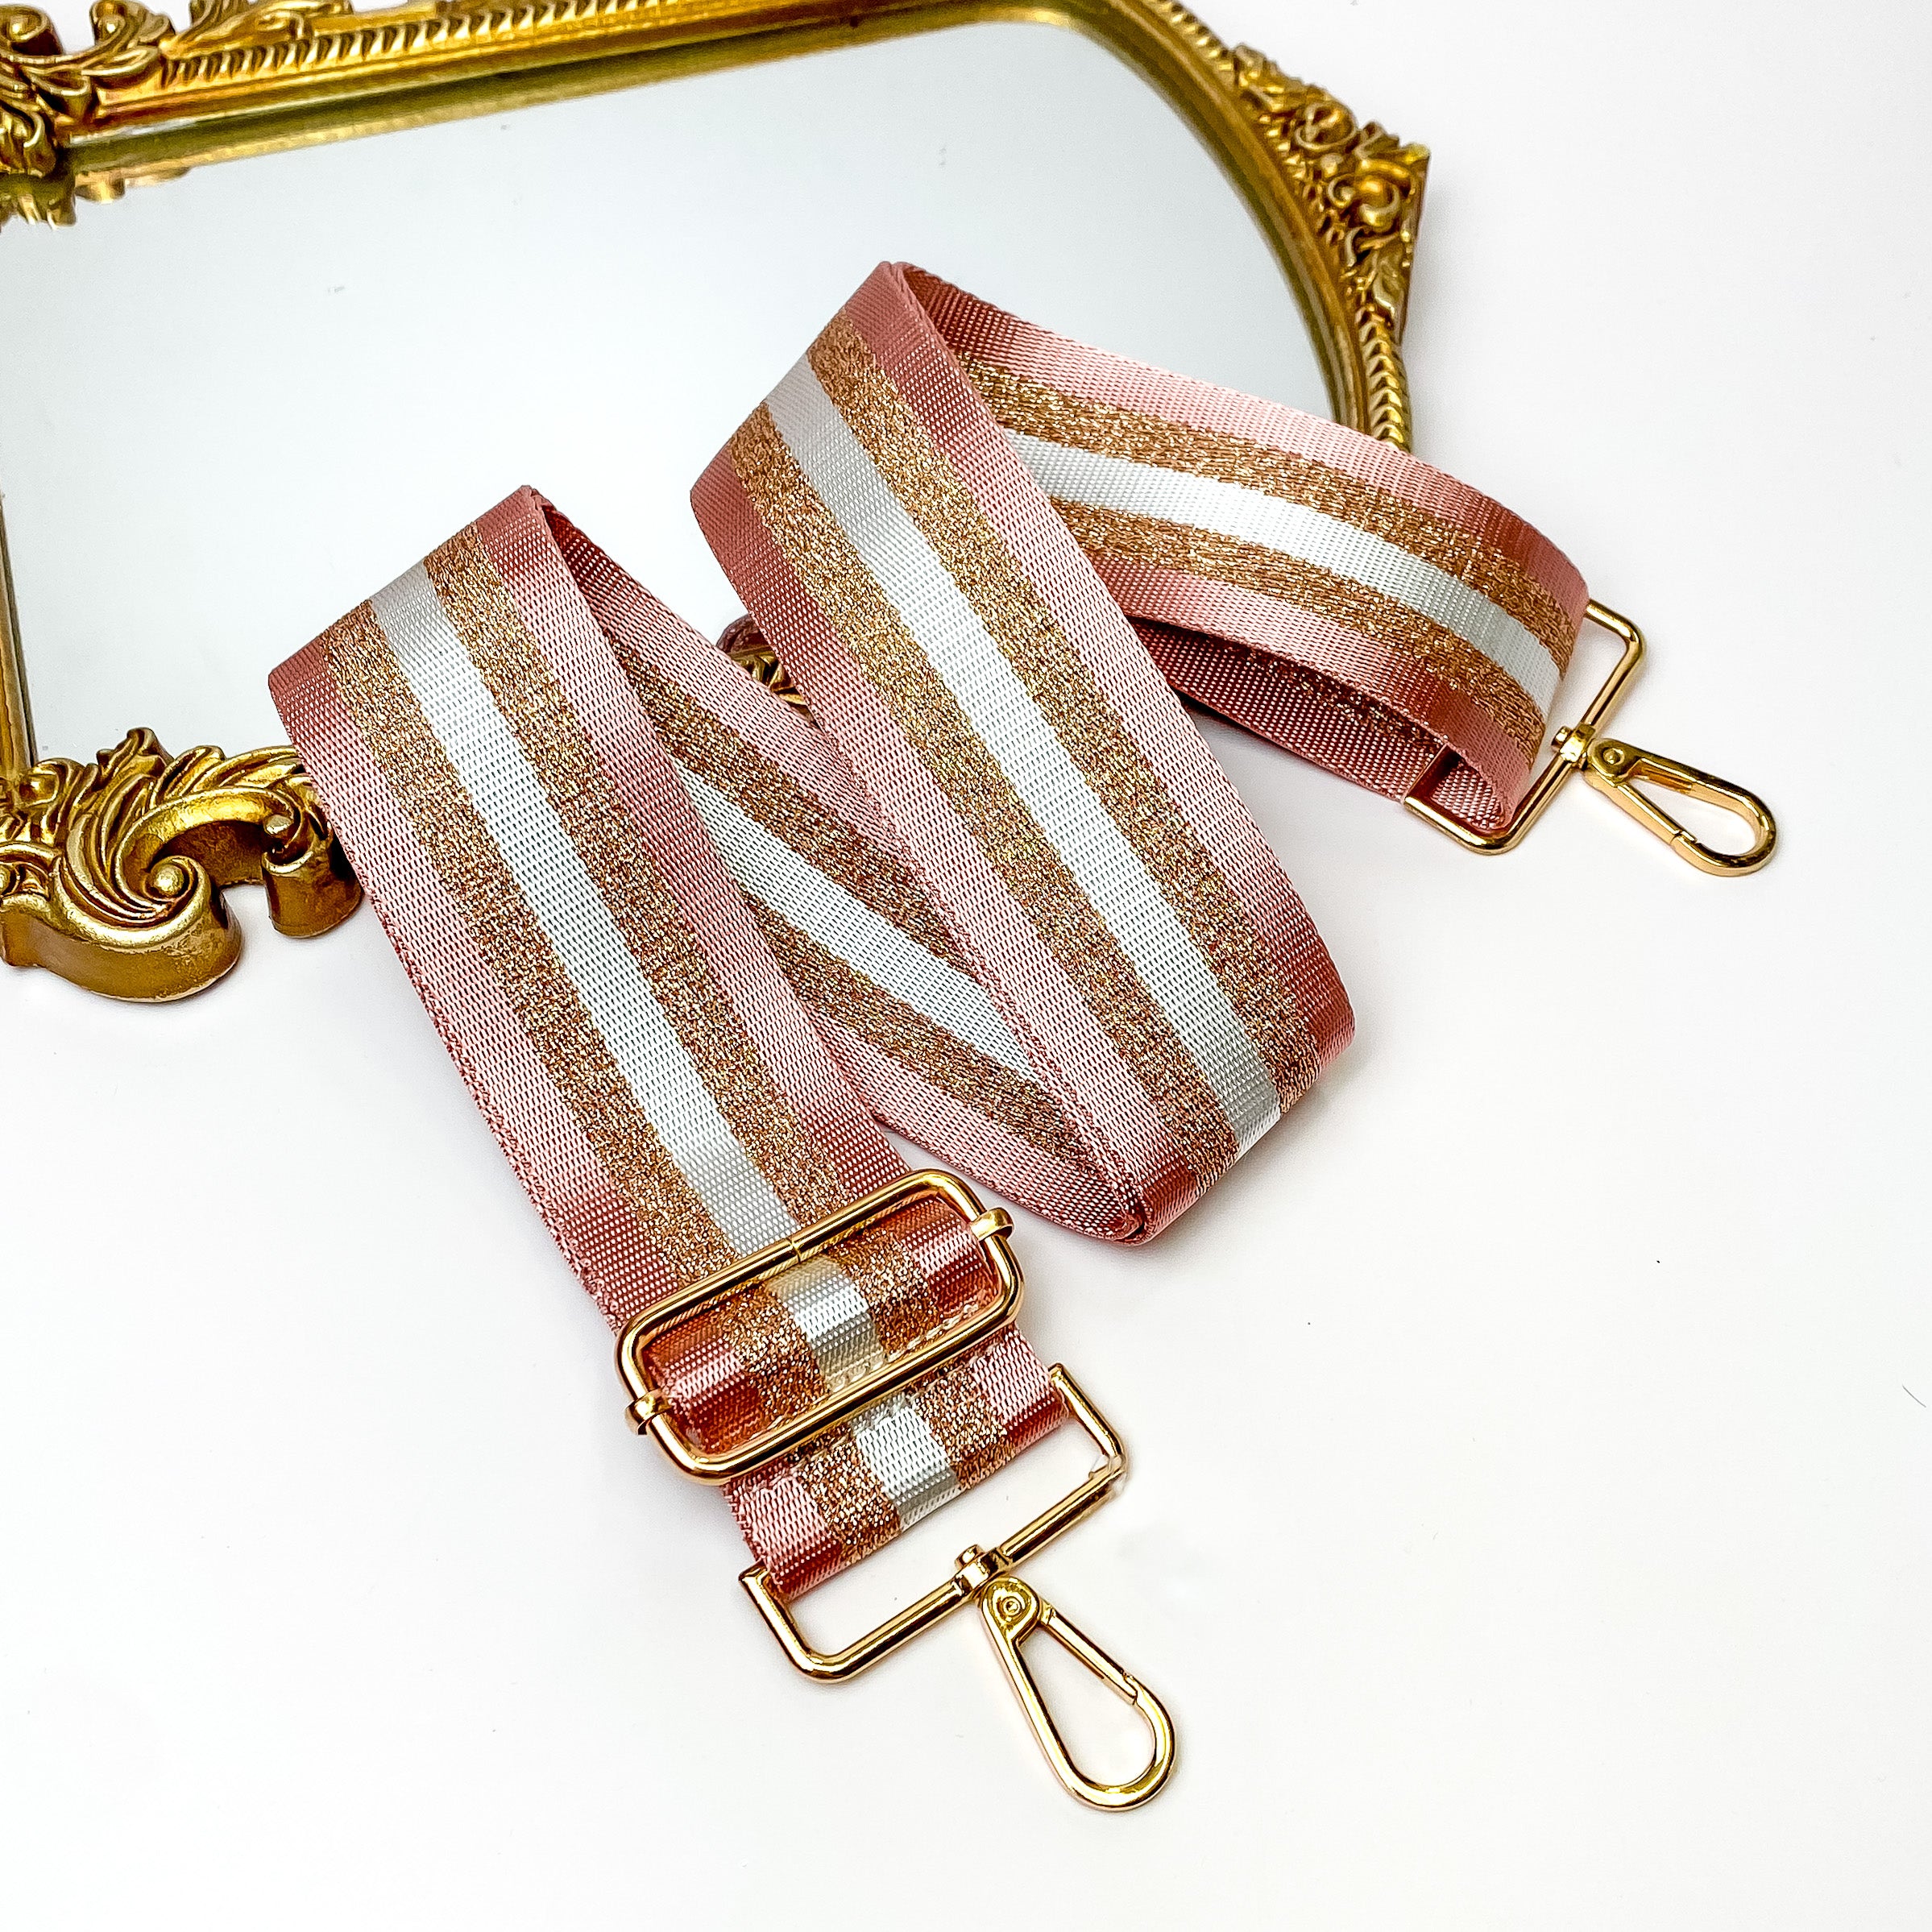 Pictured is a striped purse strap with gold accessories. This purse strap has two outer pink stripes, then two gold glitter stripes, and a center white stripe. This purse strap is laid out partially on a gold mirror on a white background. 